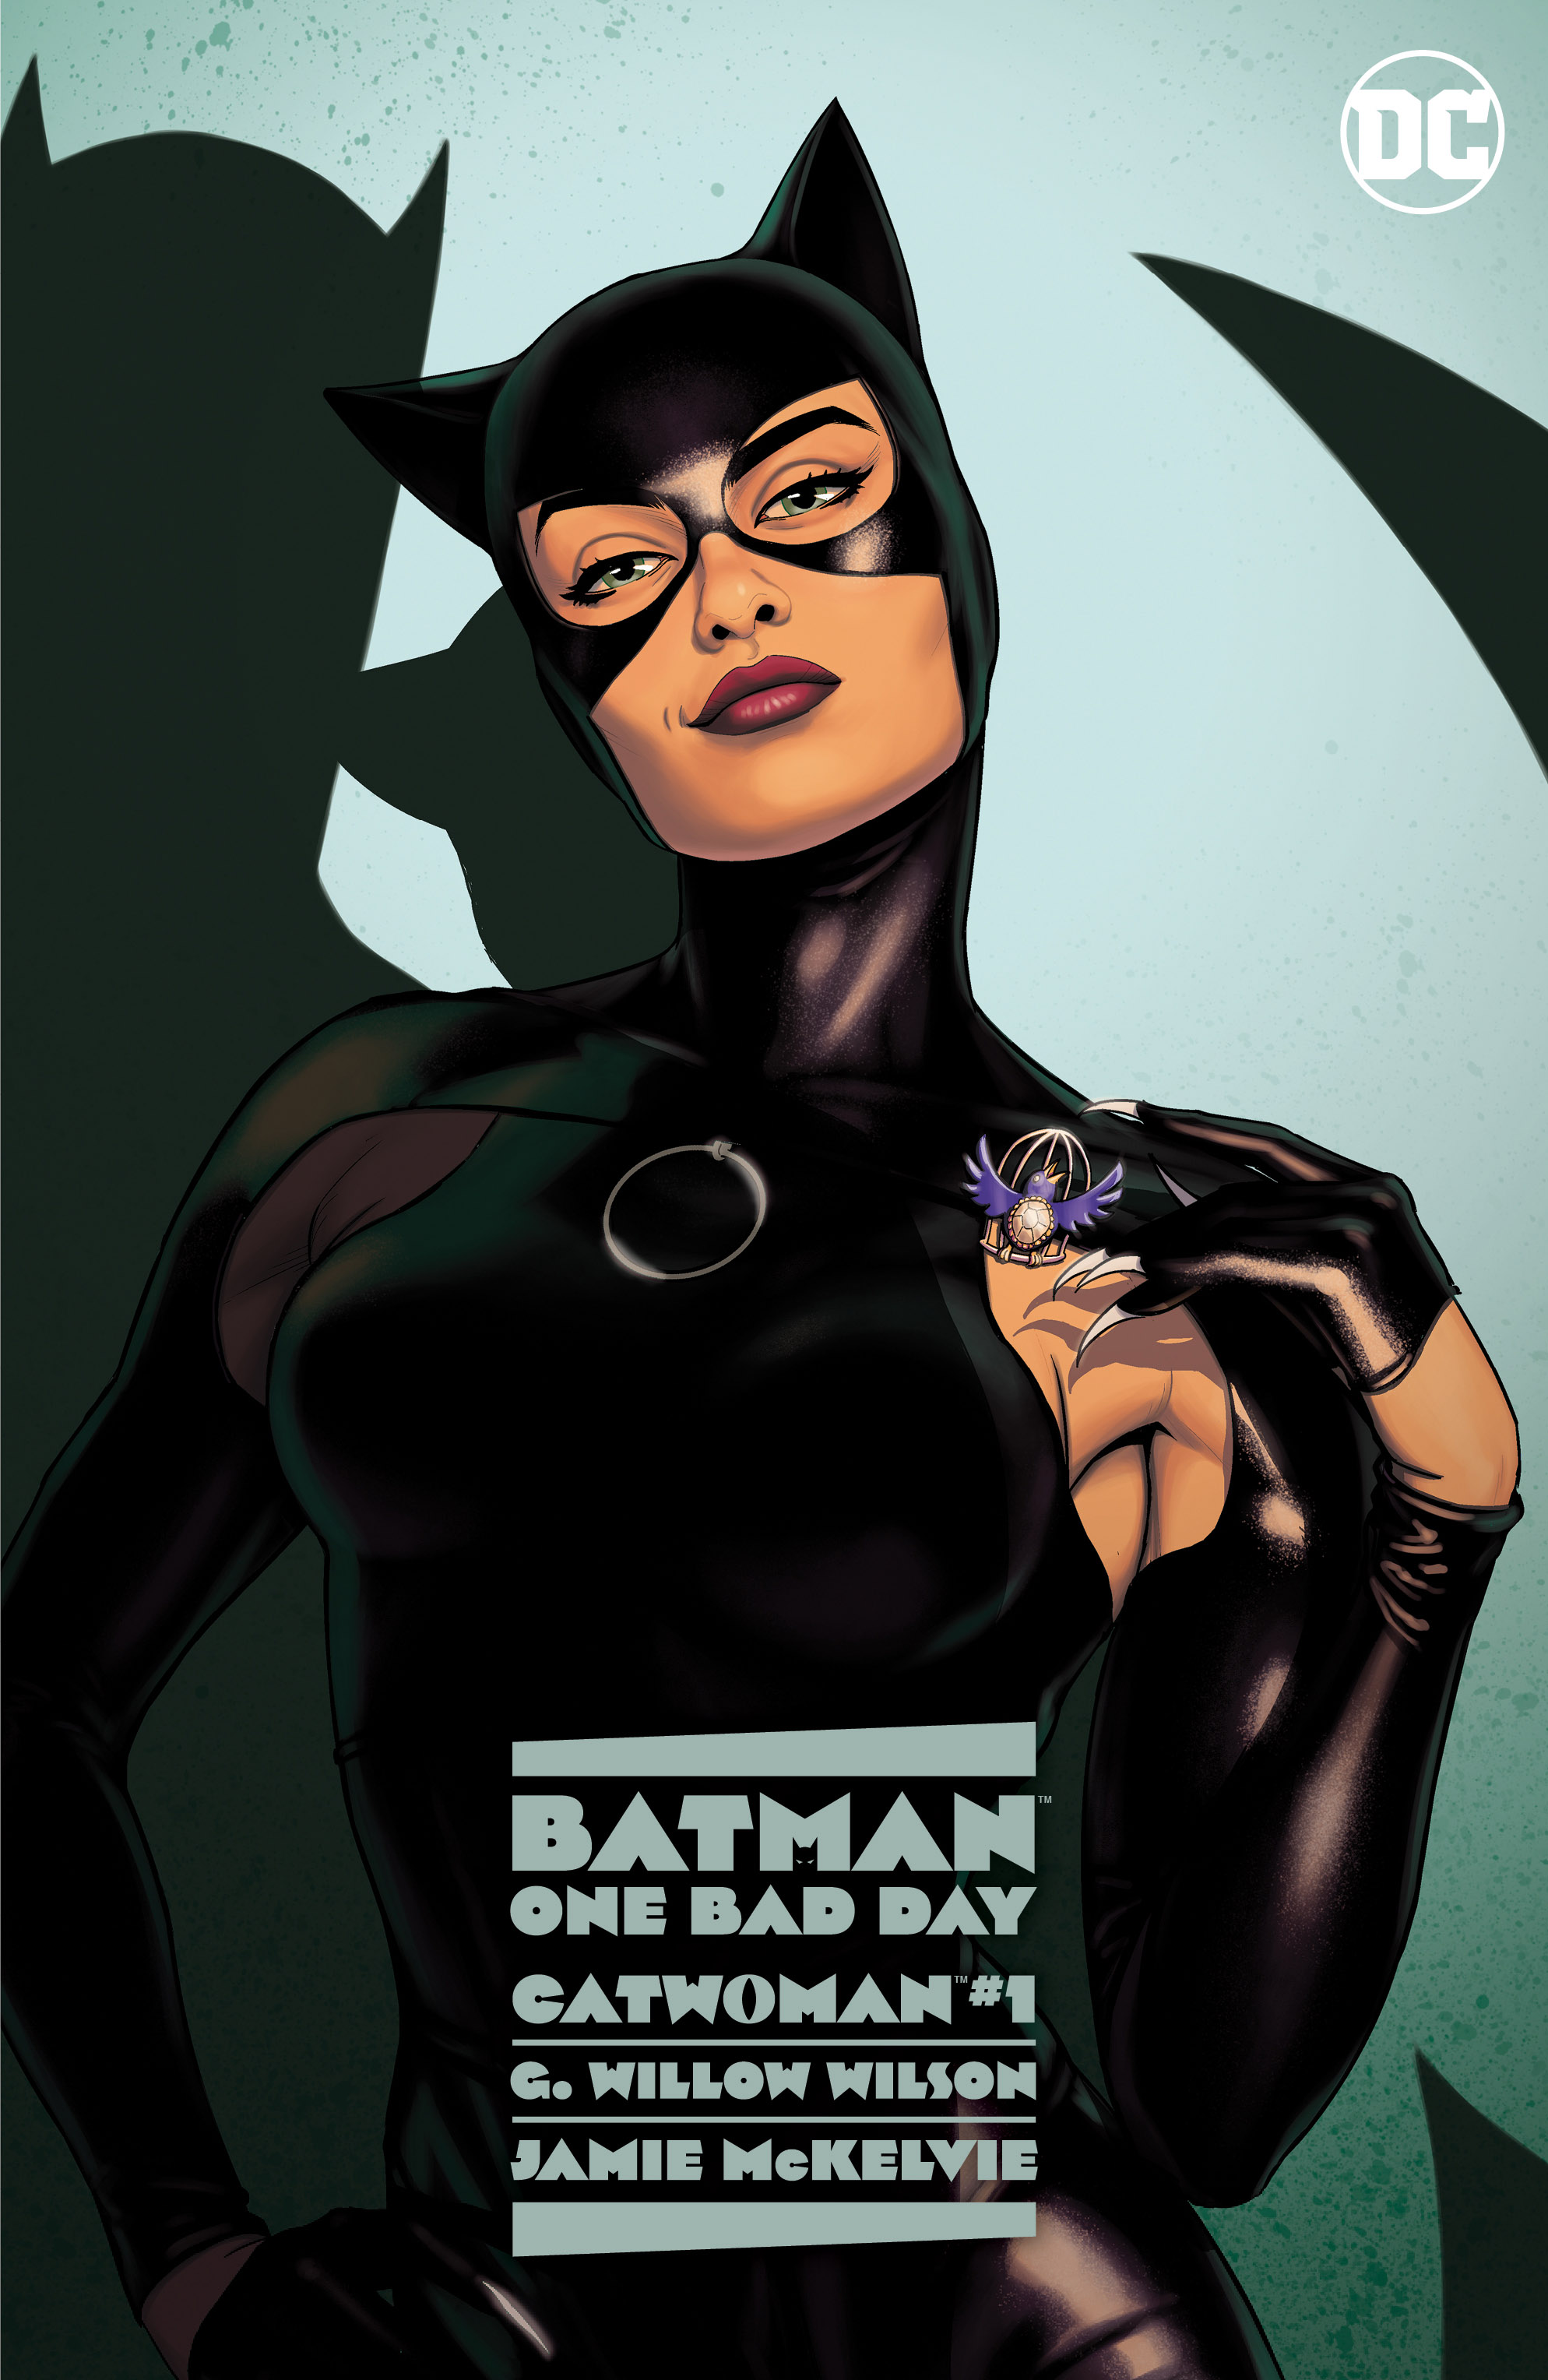 DC: Batman: One Bad Day: Catwoman #1 (One Shot) (Cover A Jamie McKelvie)  from Batman: One Bad Day: Catwoman by G. Willow Wilson published by DC  Comics @  - UK and